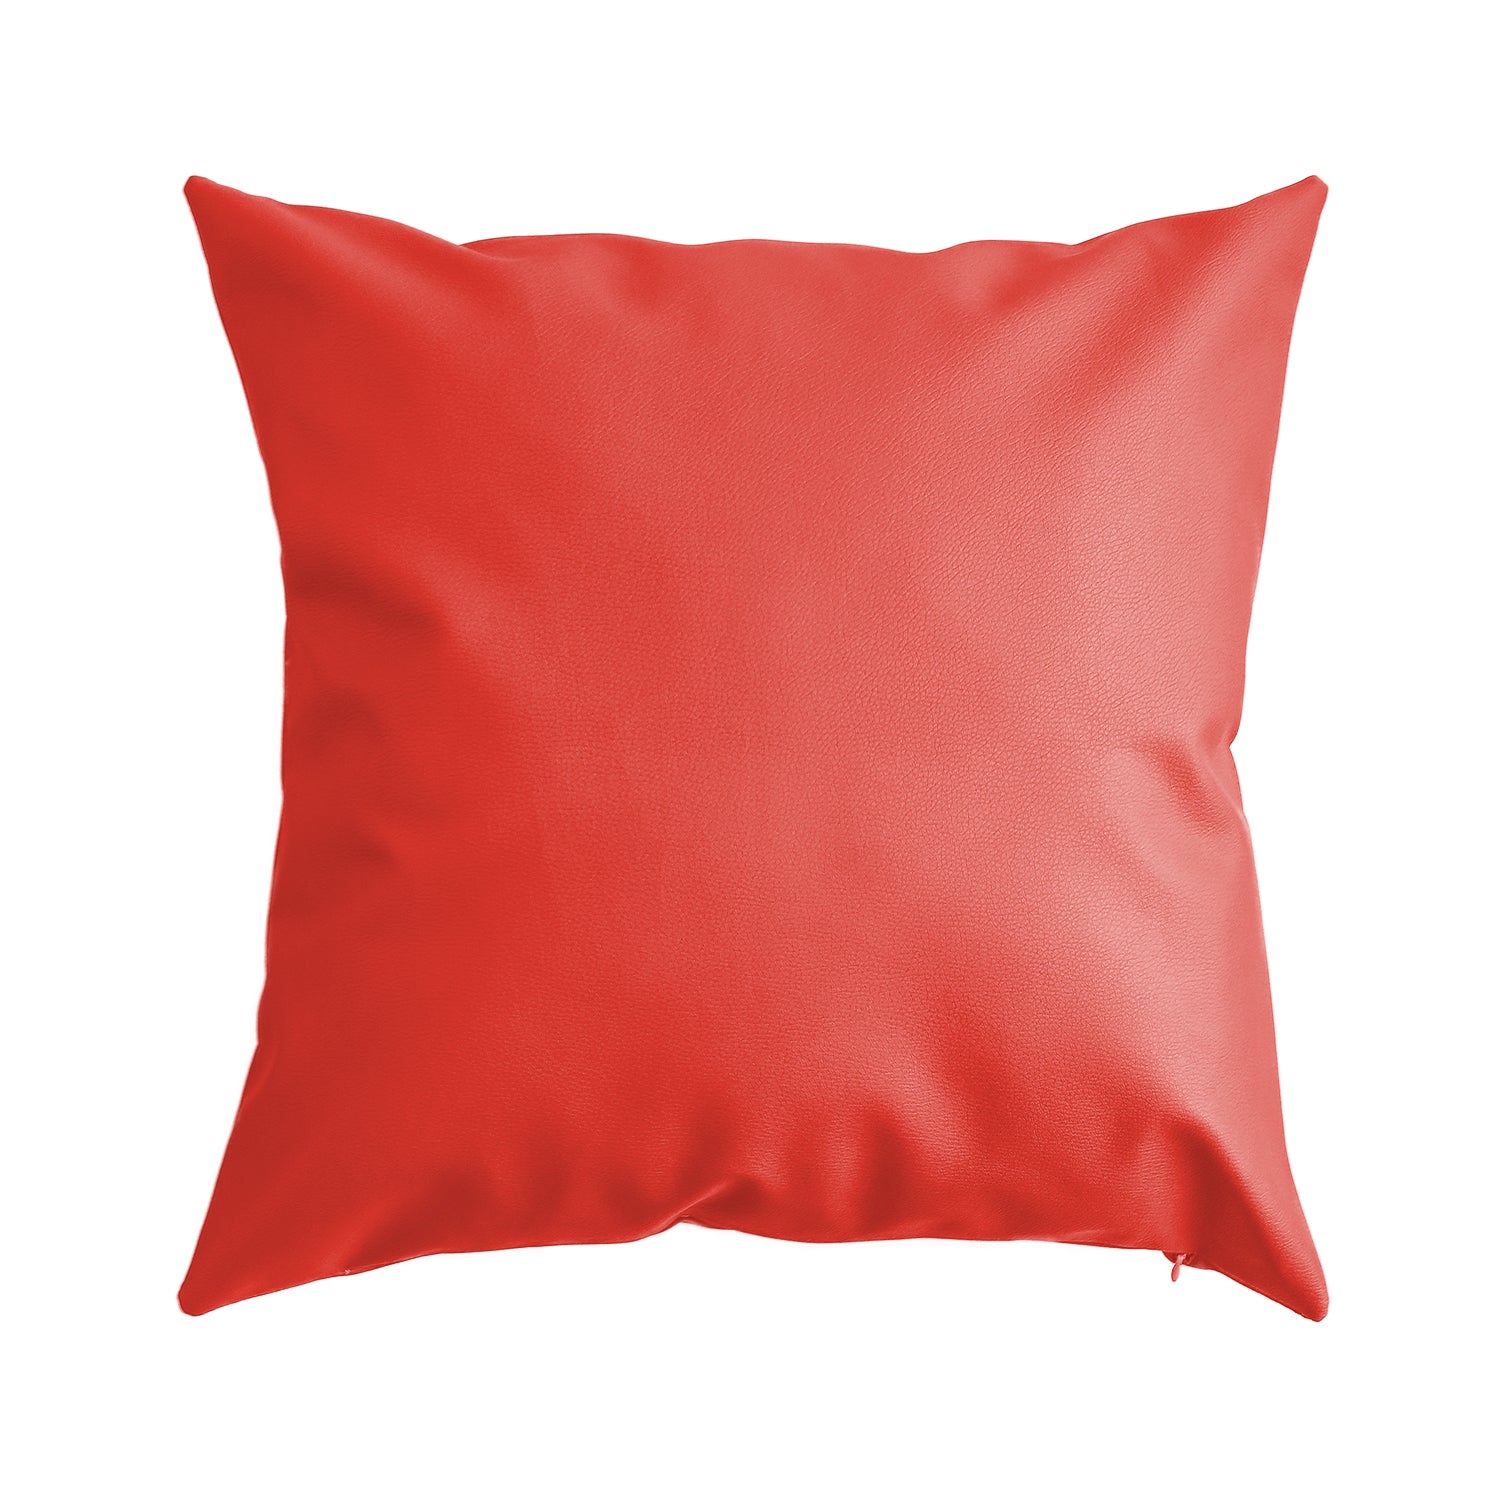 Modern Faux Leather Throw Pillow Covers Outdoor Decorative